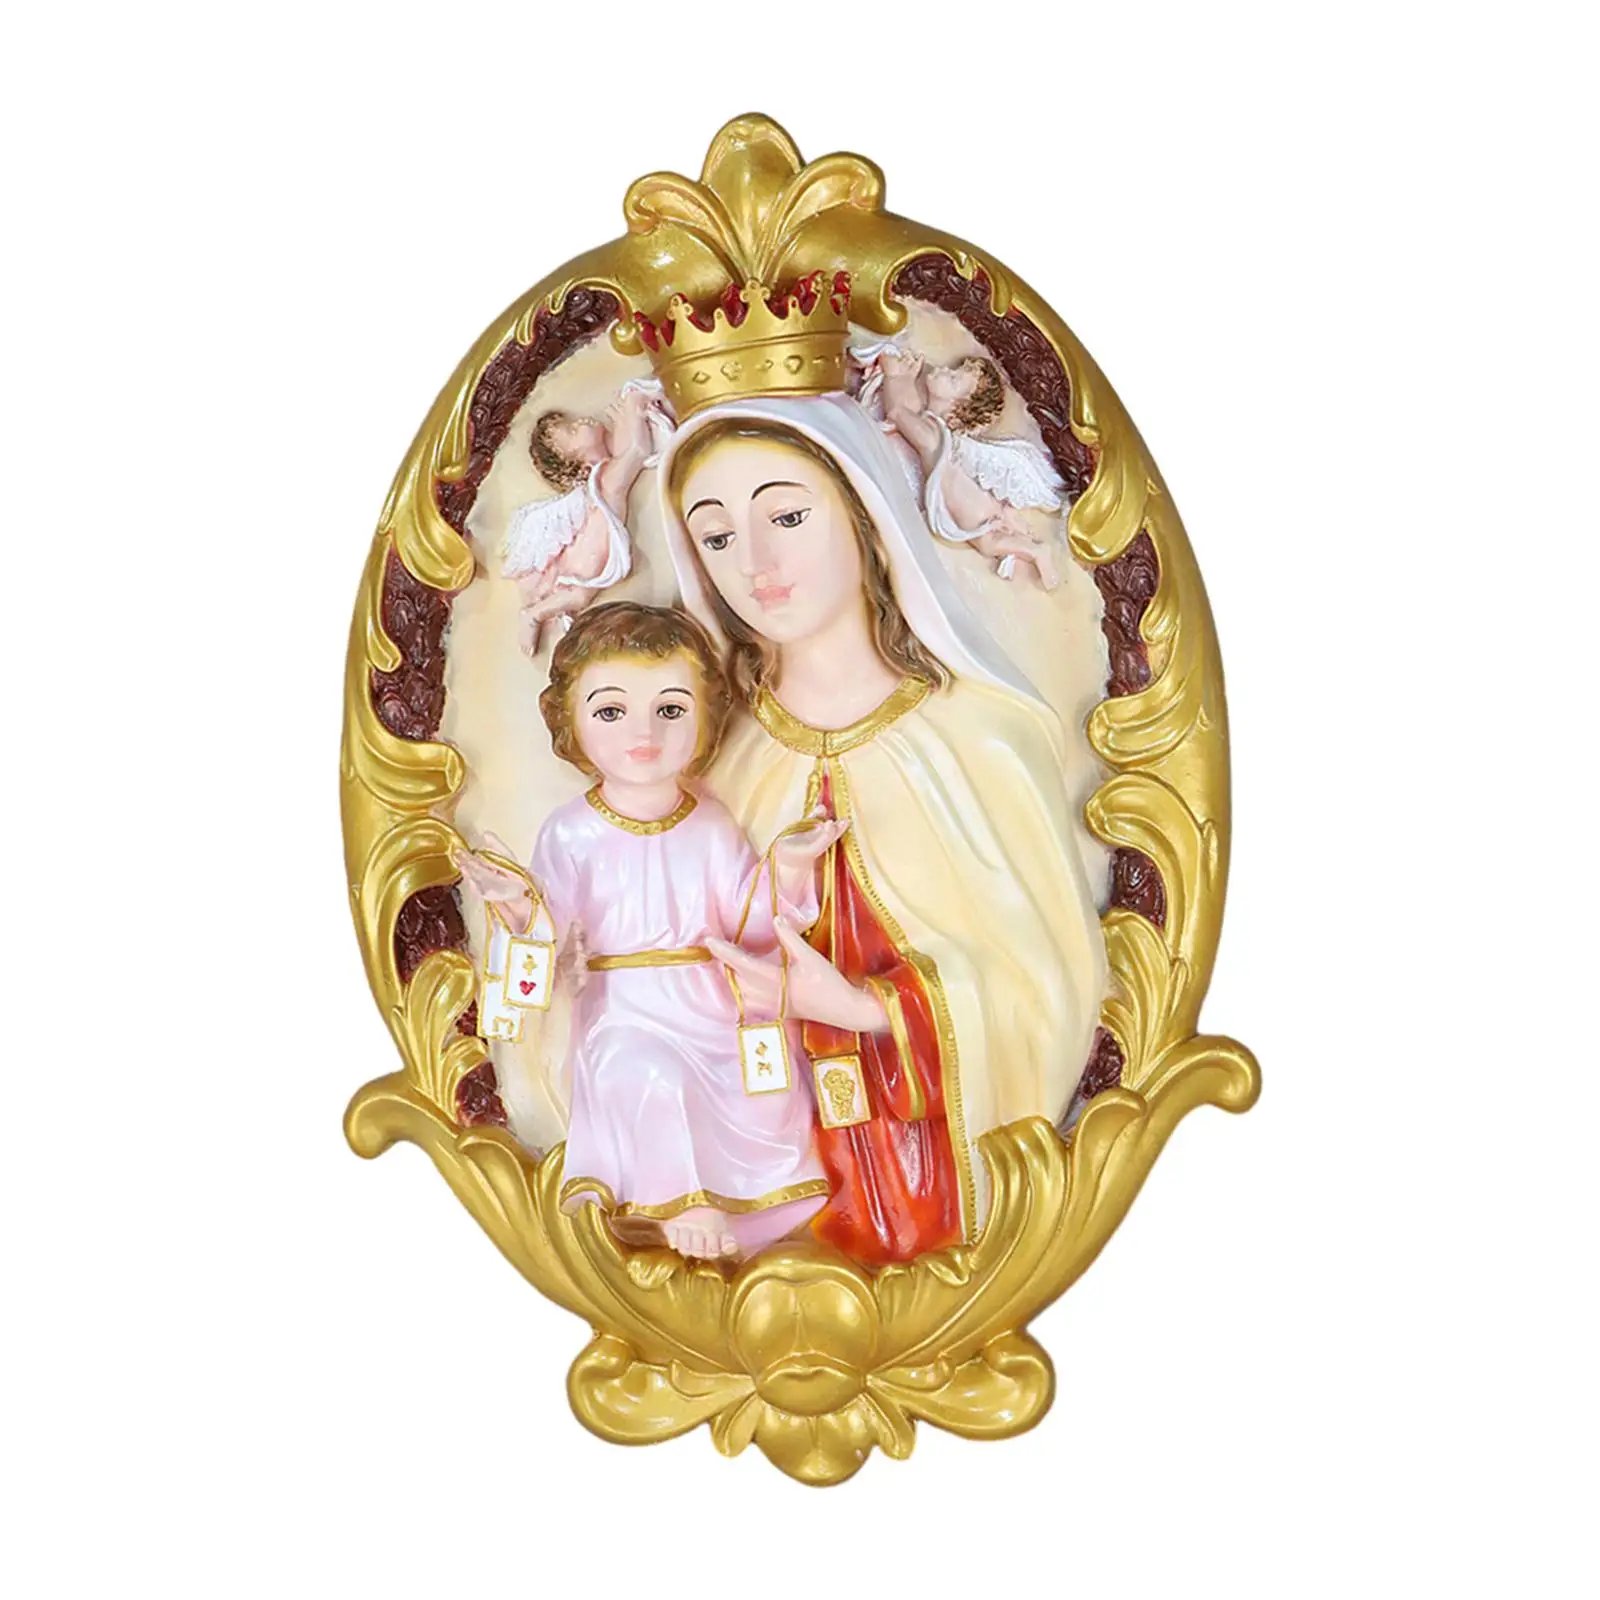 Catholic Jesus Mother Mary Sculpture Xmas Present for Desktop Wall Fireplace